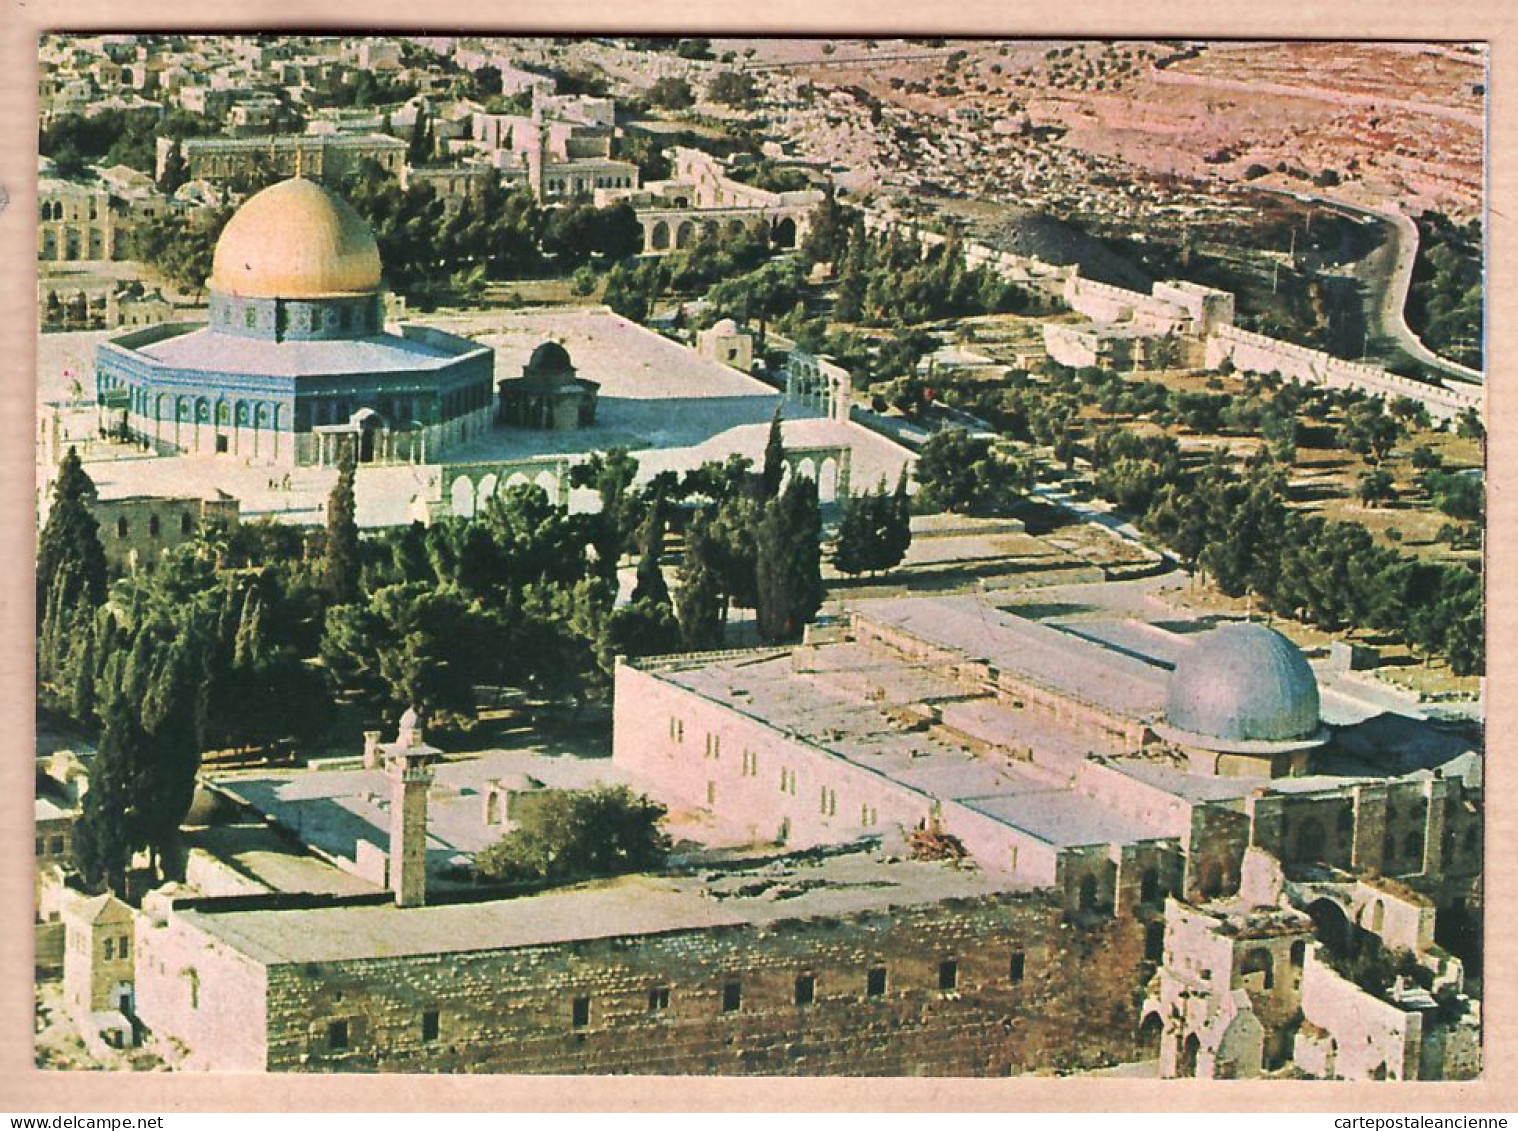 01790 / TEMPLE AERA FROM AIR ISRAEL 1970s - Israel